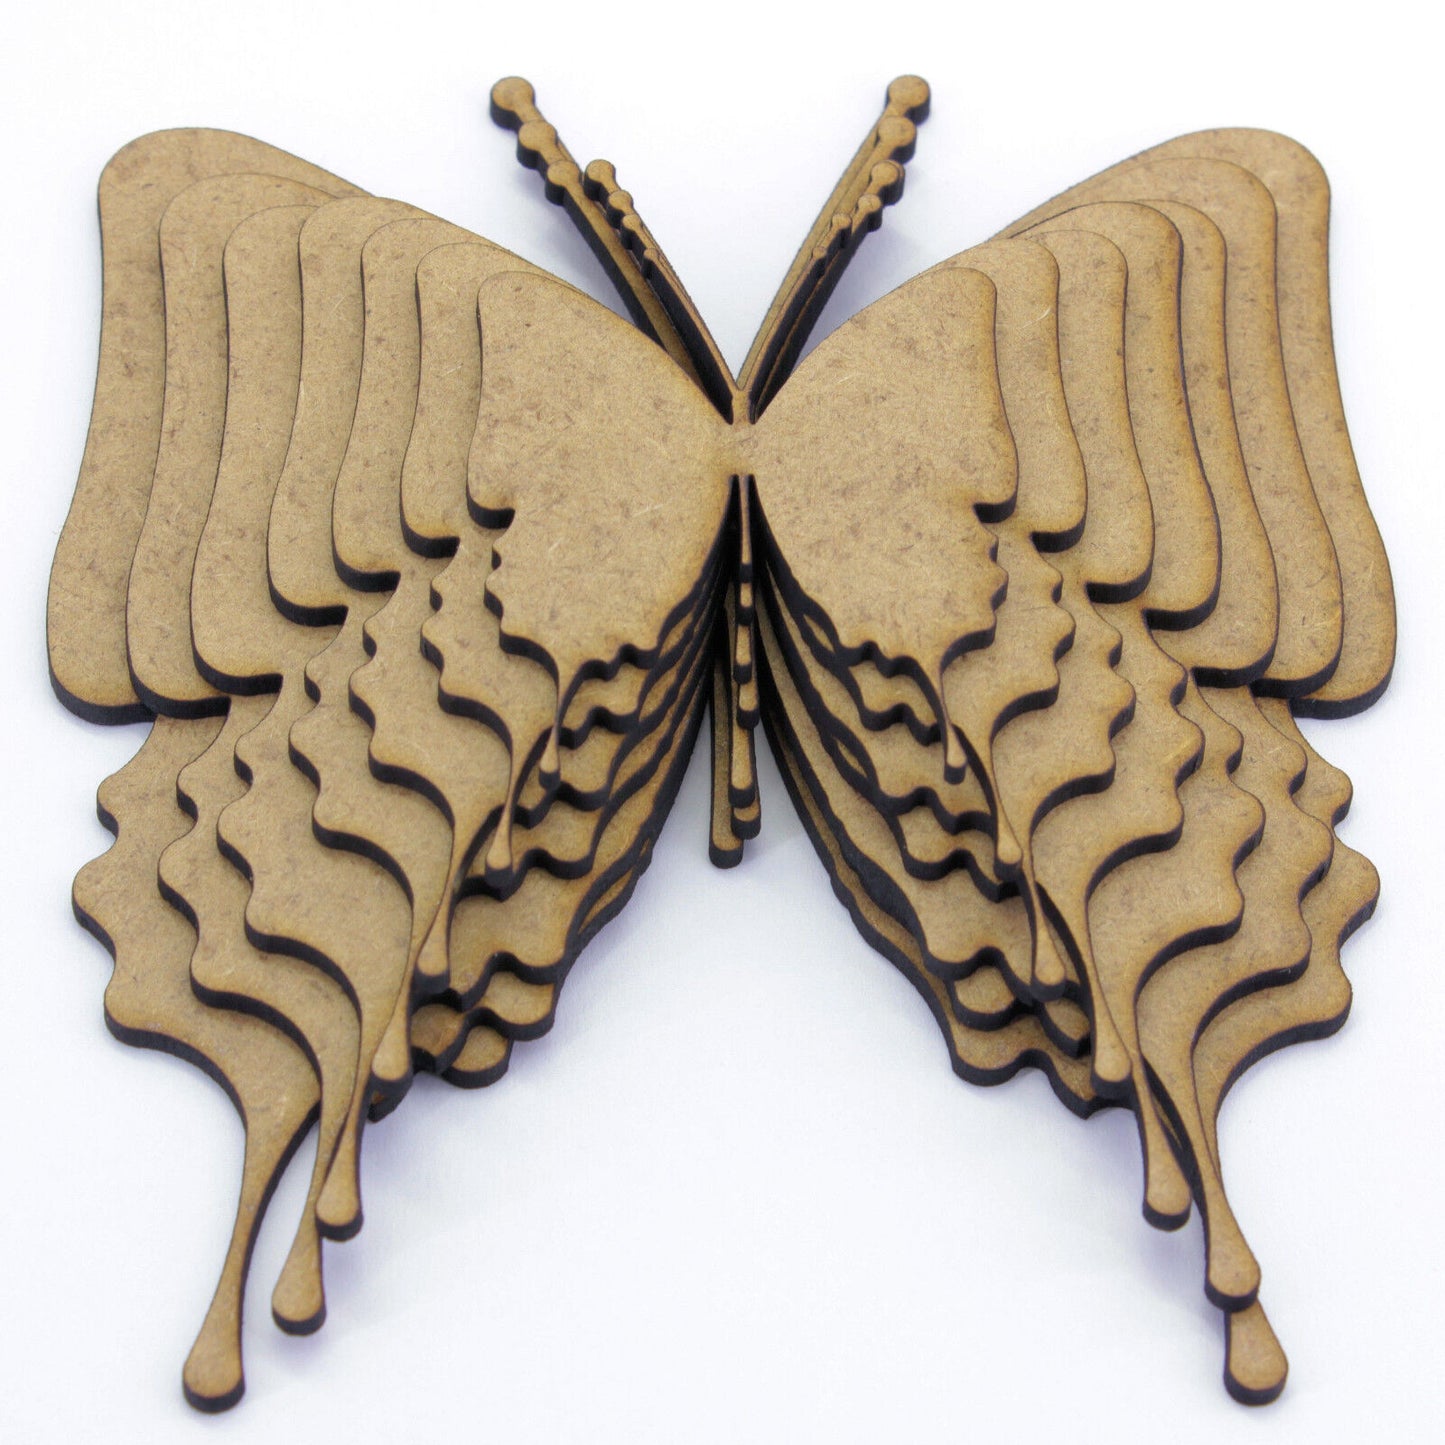 2mm MDF Wooden Fancy Butterfly, Craft Shapes, Embellishments, Tags, Decorations